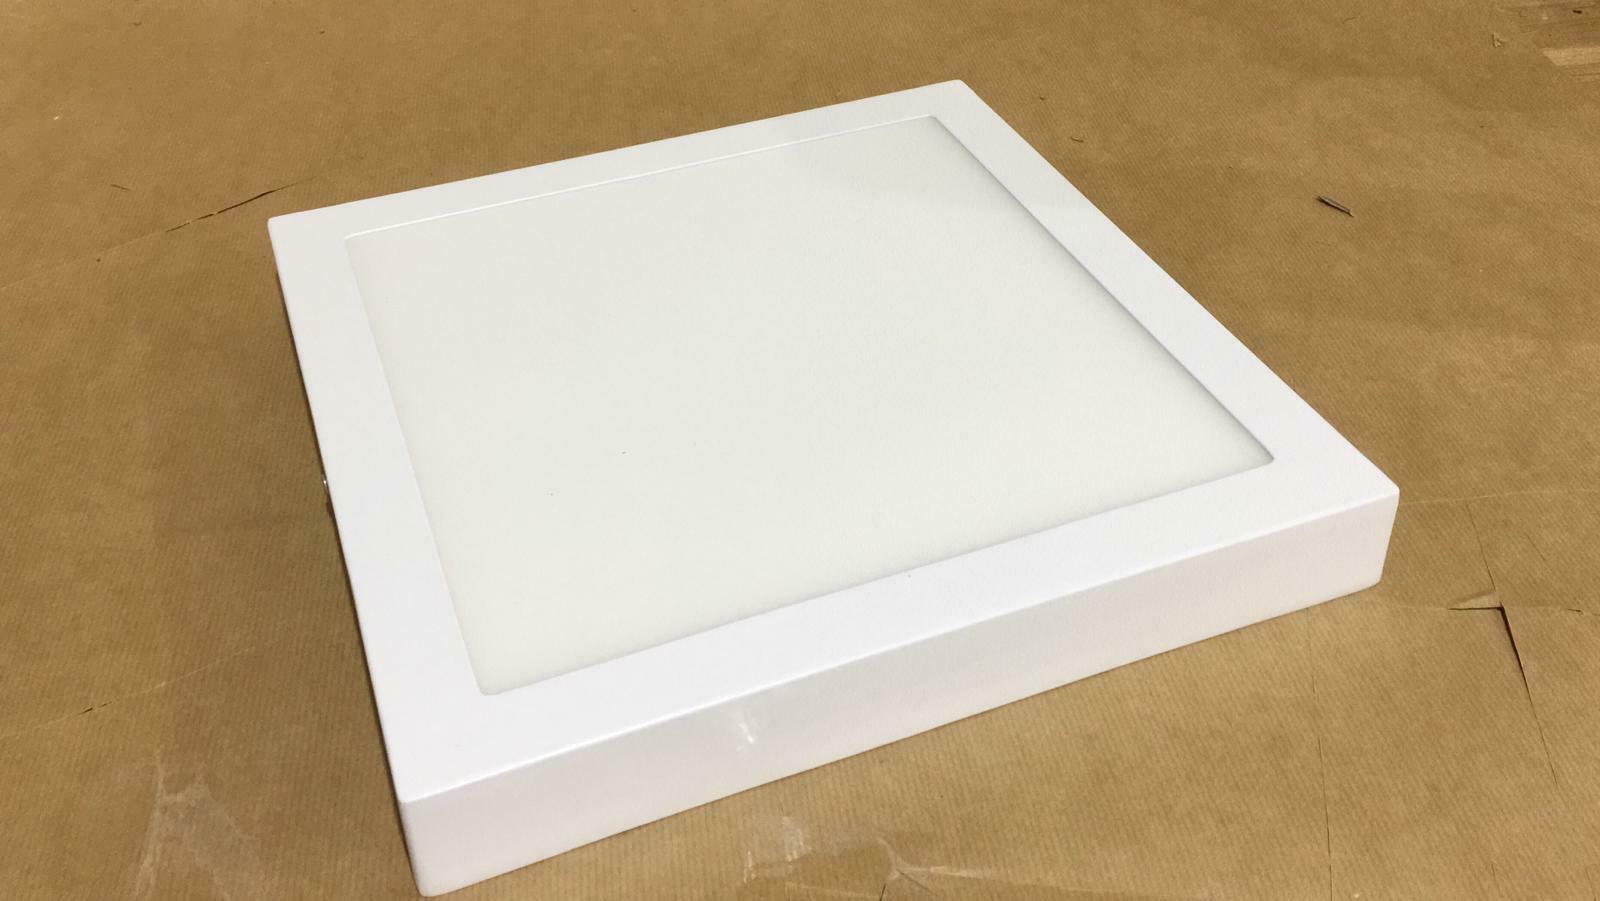 Creyer Surface Mounted Square 24W LED Ceiling Lights, 1.02 kg, warm white, 2158